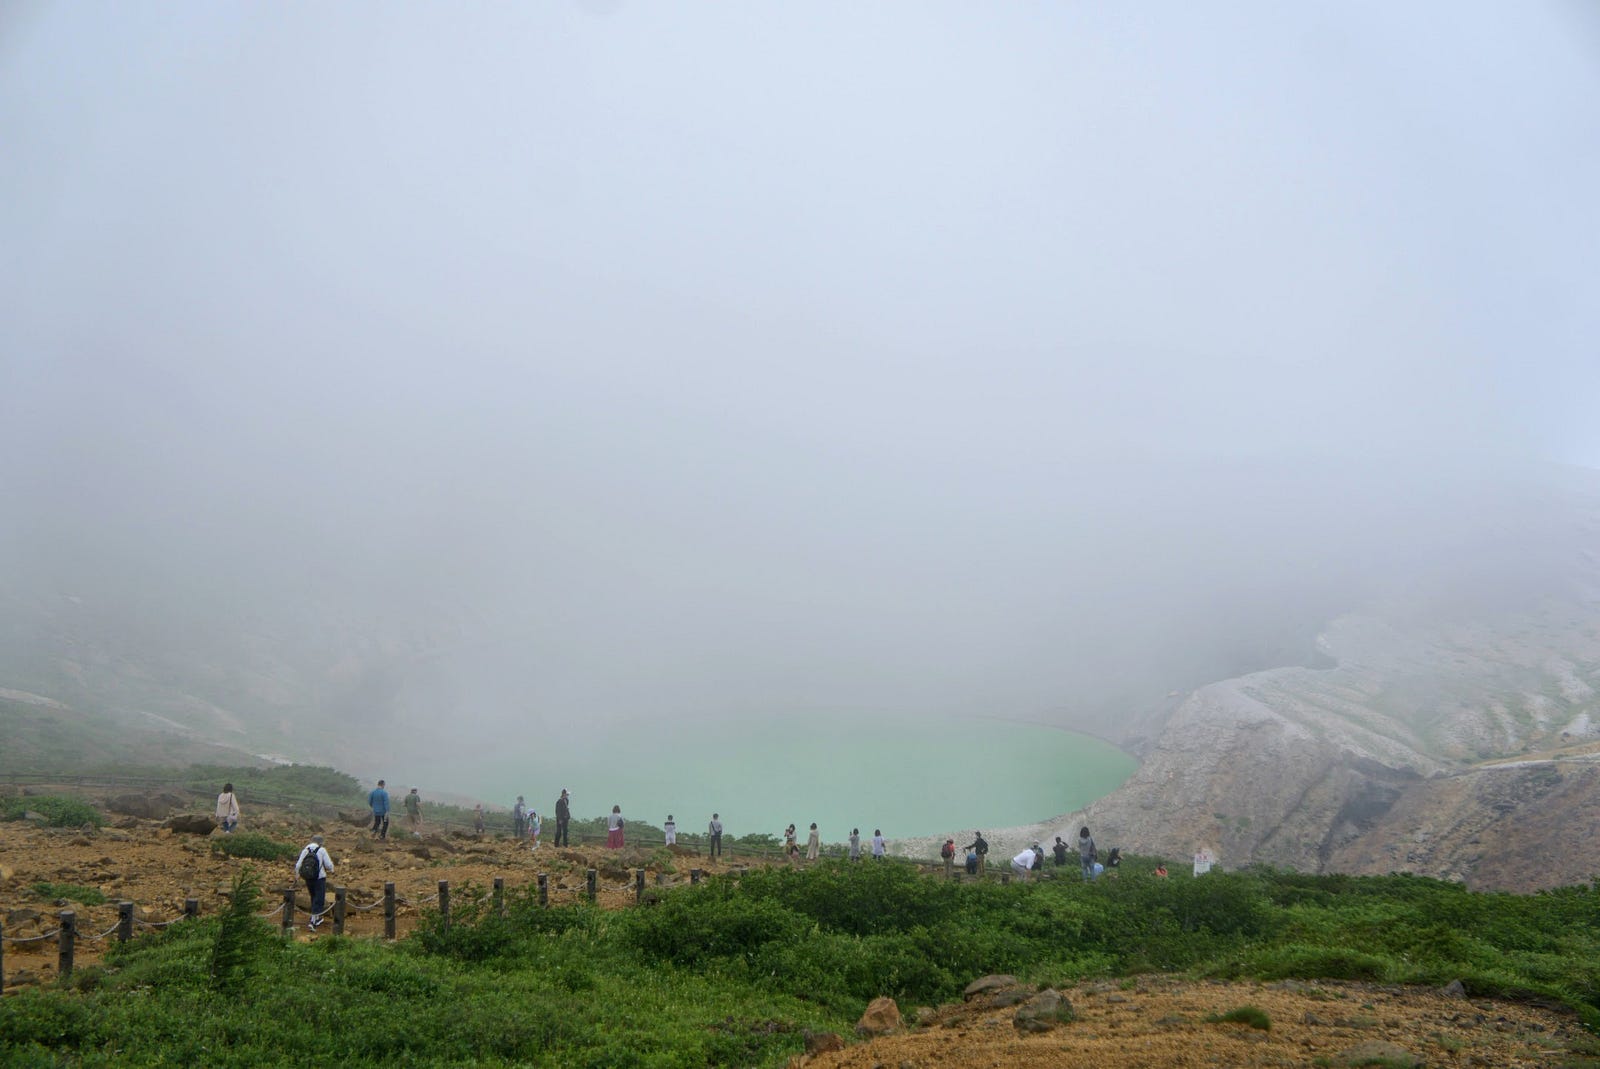 Onlookers surround the emerald green ‘Okama’ crater lake of Zao-san (Mt. Zao) surrounded in a thick cloud.